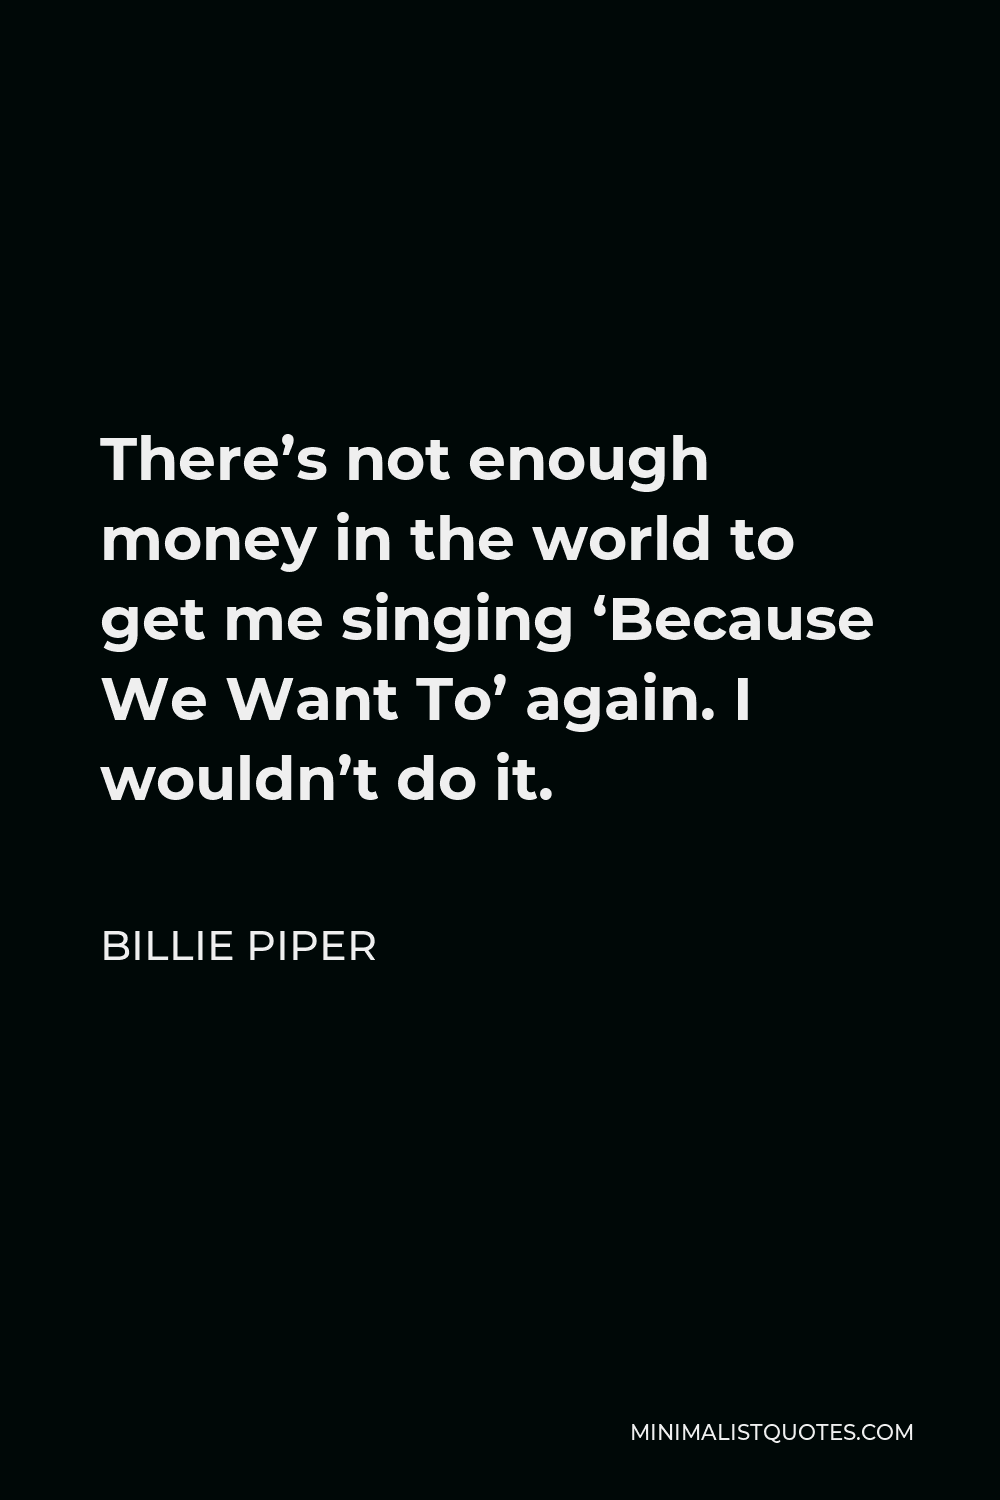 Billie Piper Quote - There’s not enough money in the world to get me singing ‘Because We Want To’ again. I wouldn’t do it.